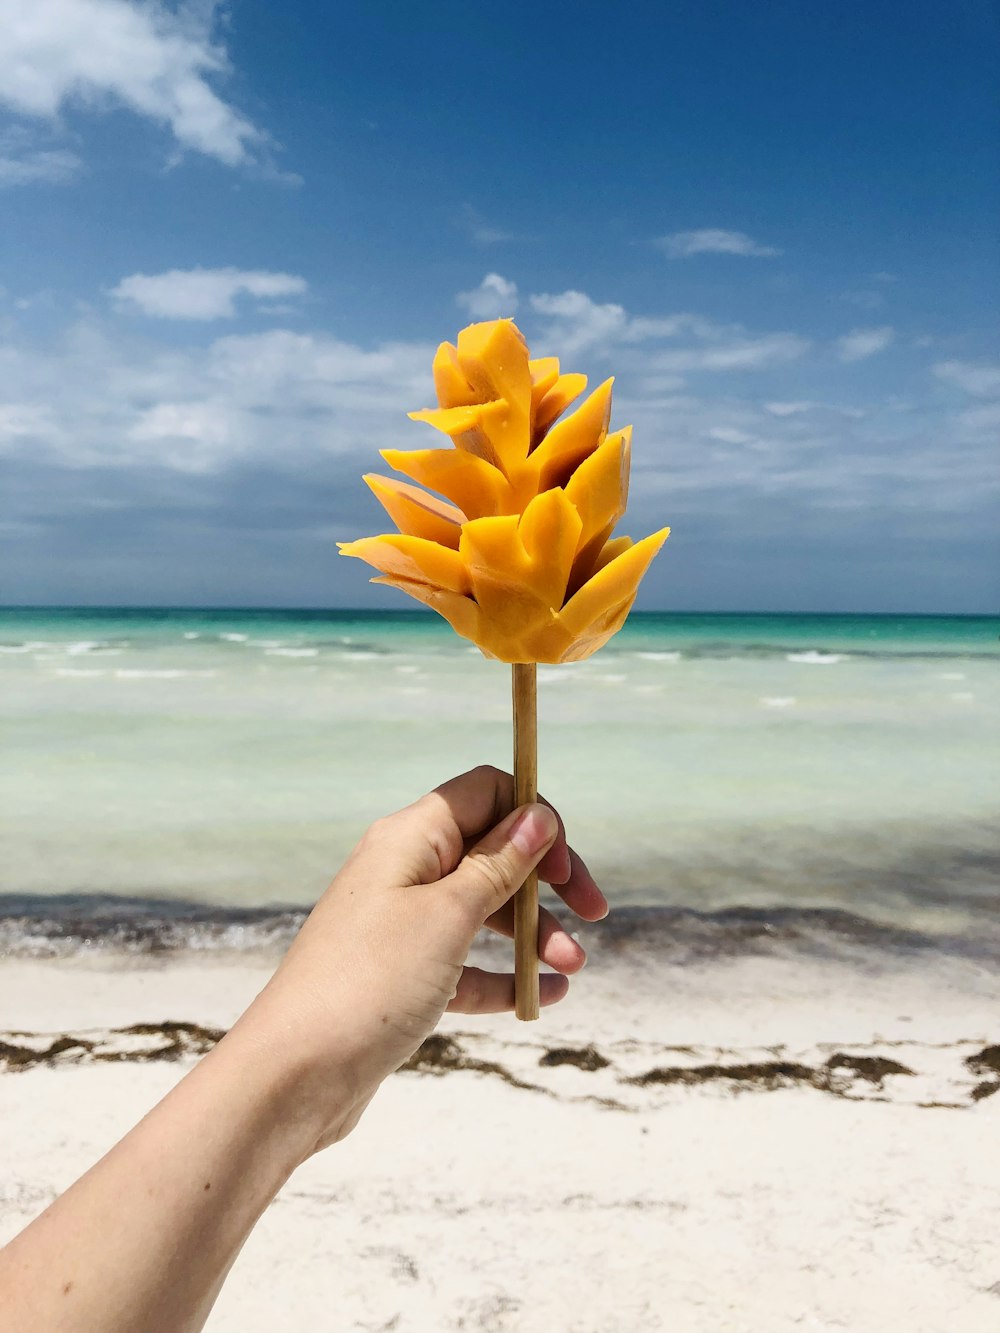 a hand holding a yellow flower on a beach